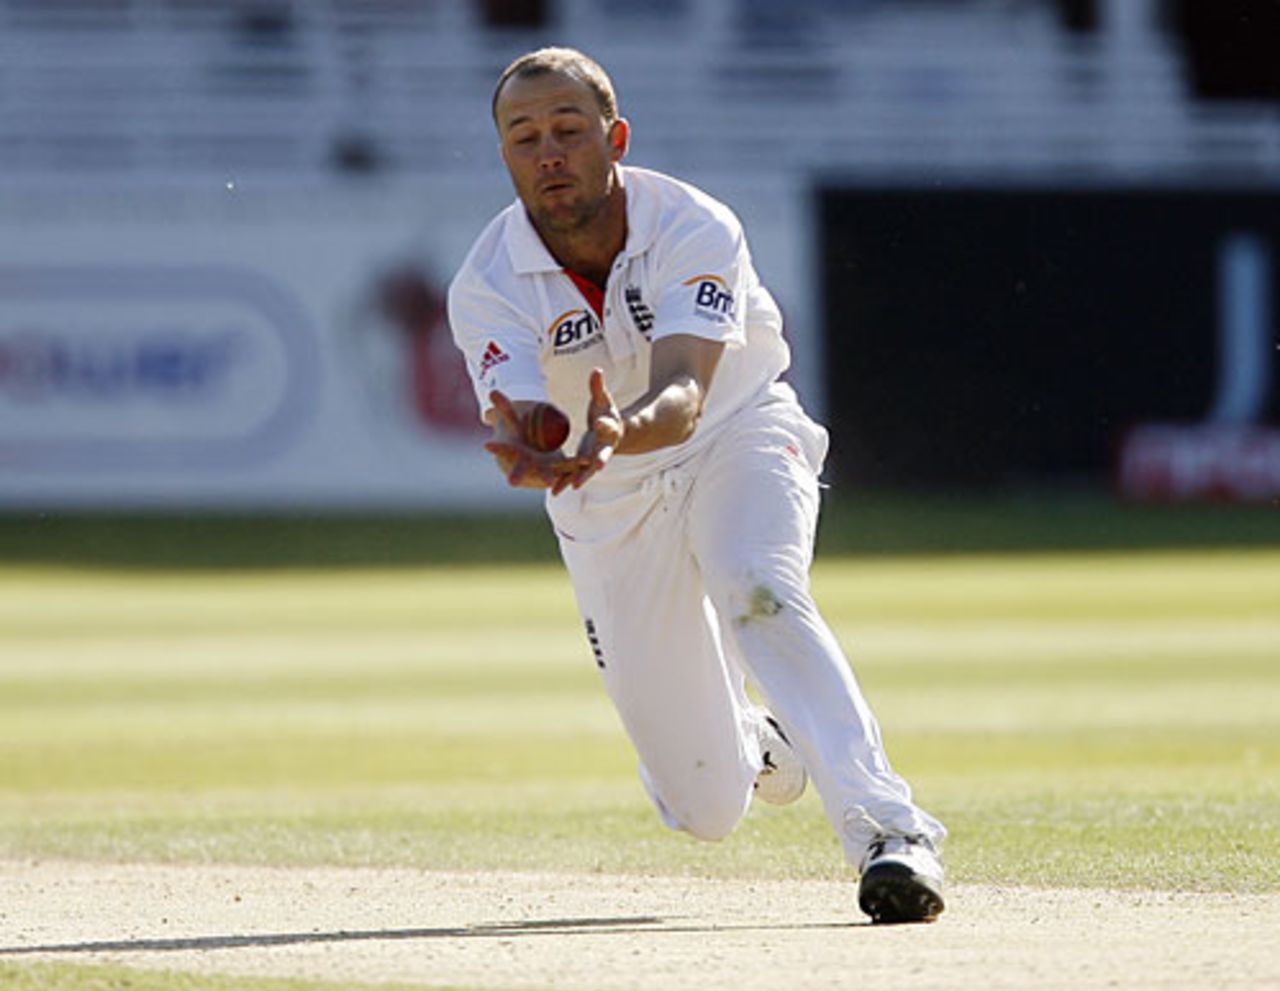 Jonathan Trott held a caught and bowled to claim his first Test wicket, England v Bangladesh, 1st Test, Lord's, May 30, 2010 
